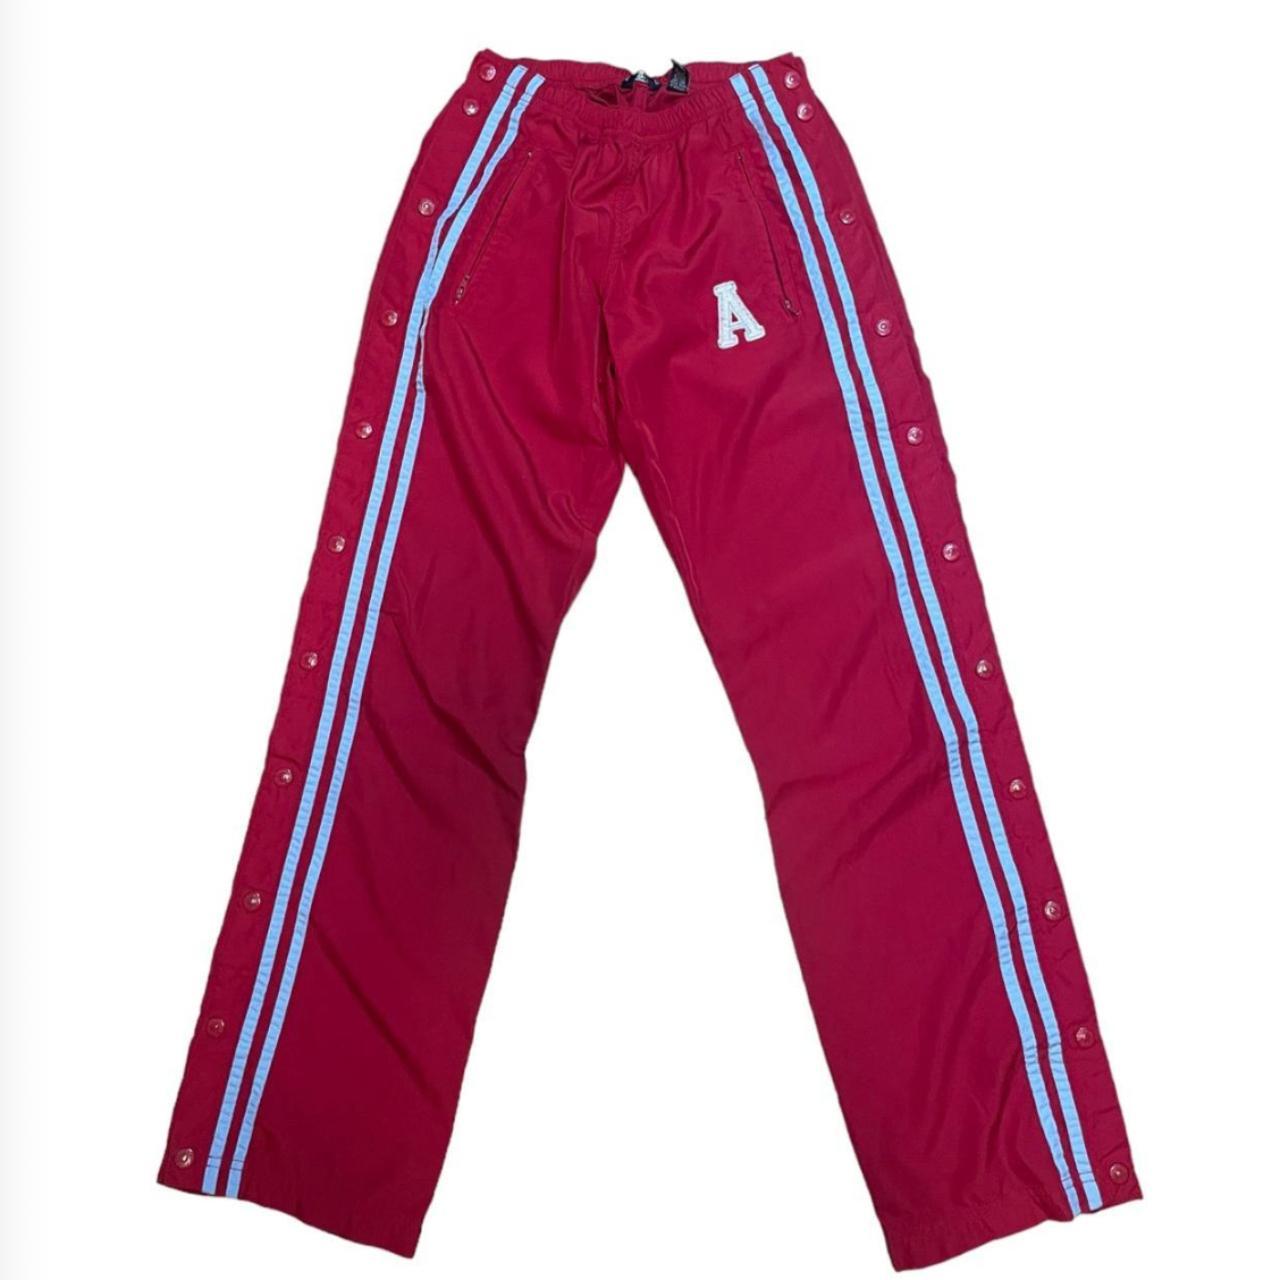 THE ICONIC TRACK PANTS - LIGHT BLUE